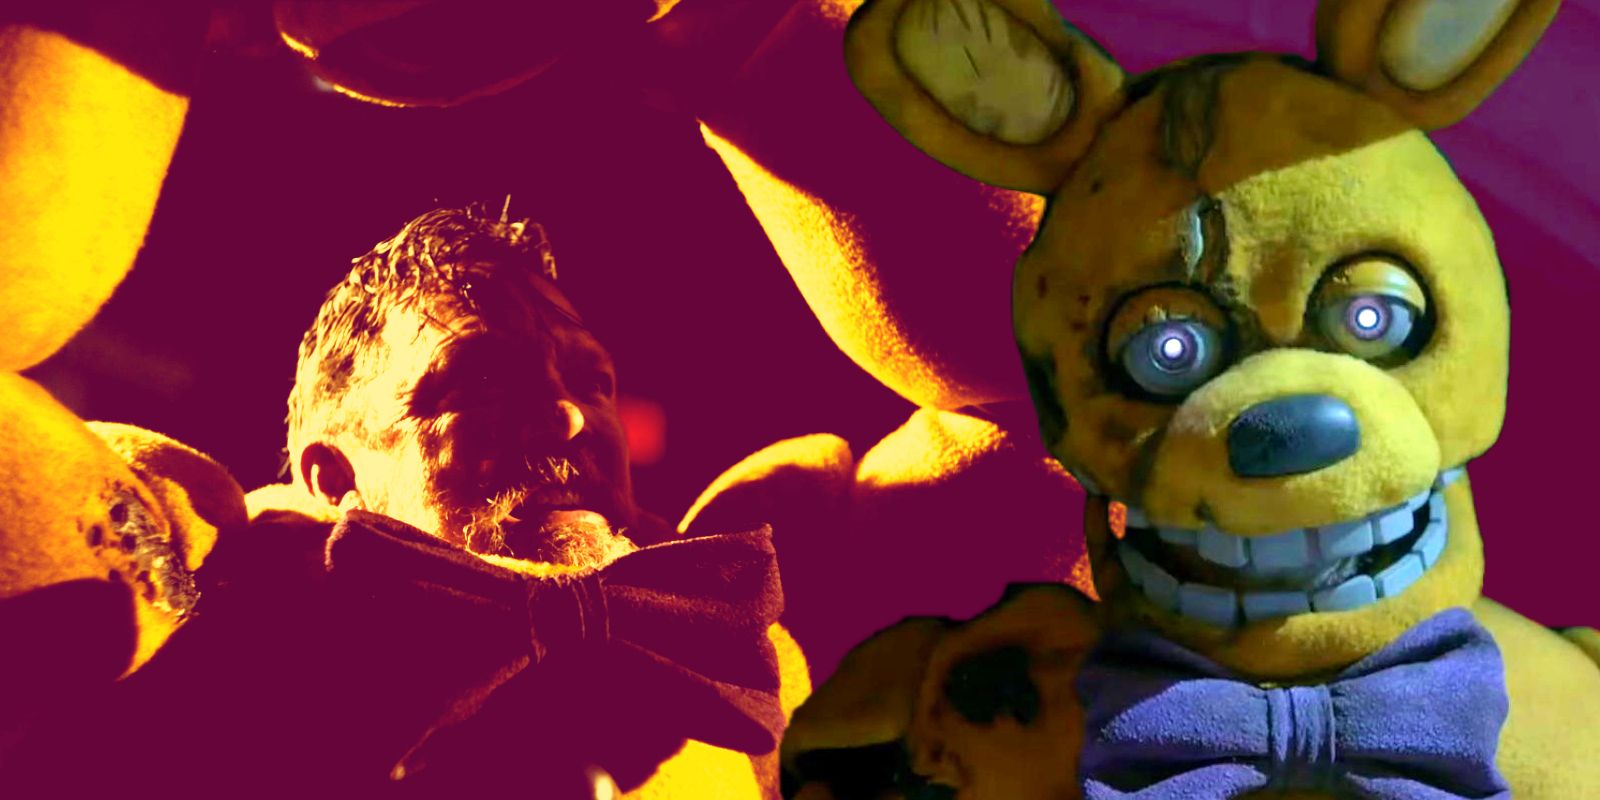 I love that the eyes of Springtrap are faithful to the FNAF 3